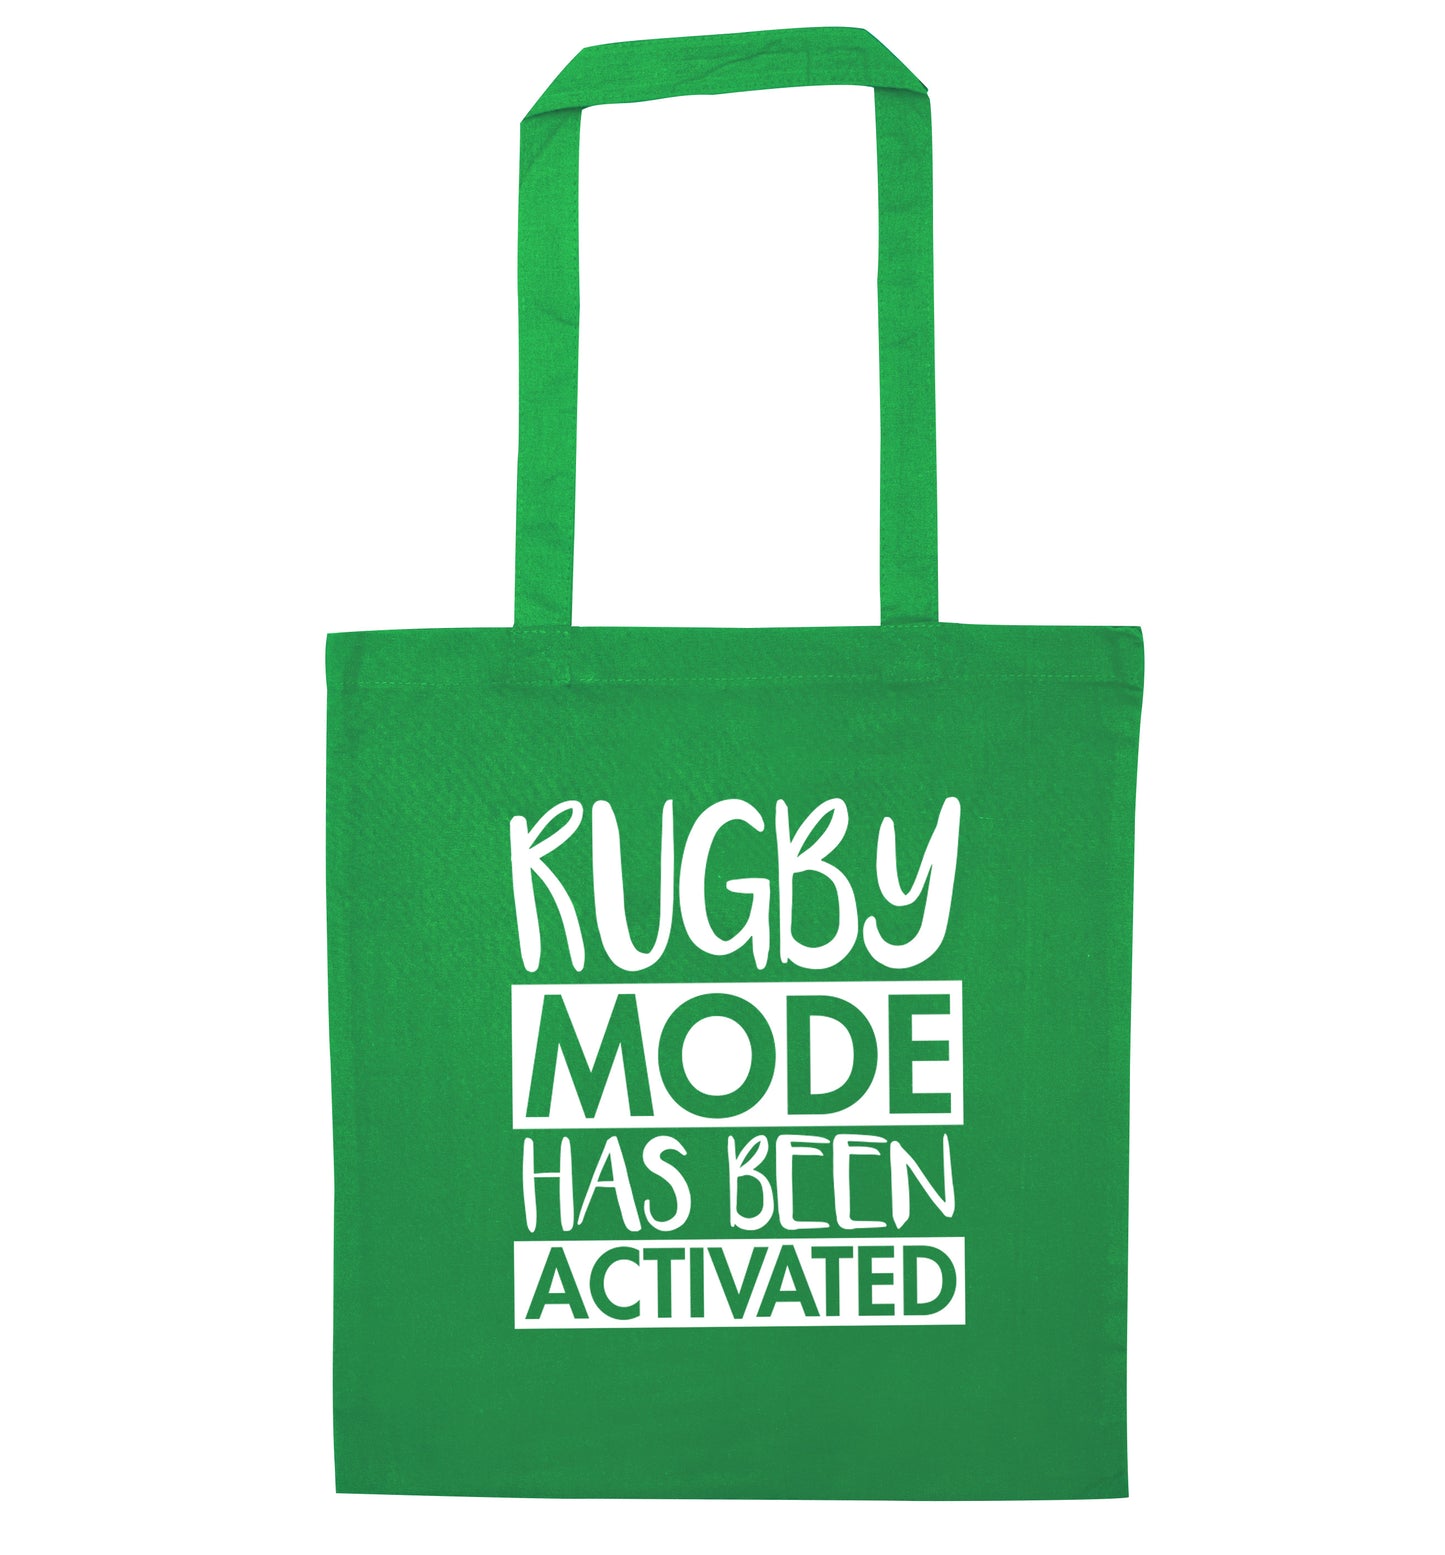 Rugby mode activated green tote bag